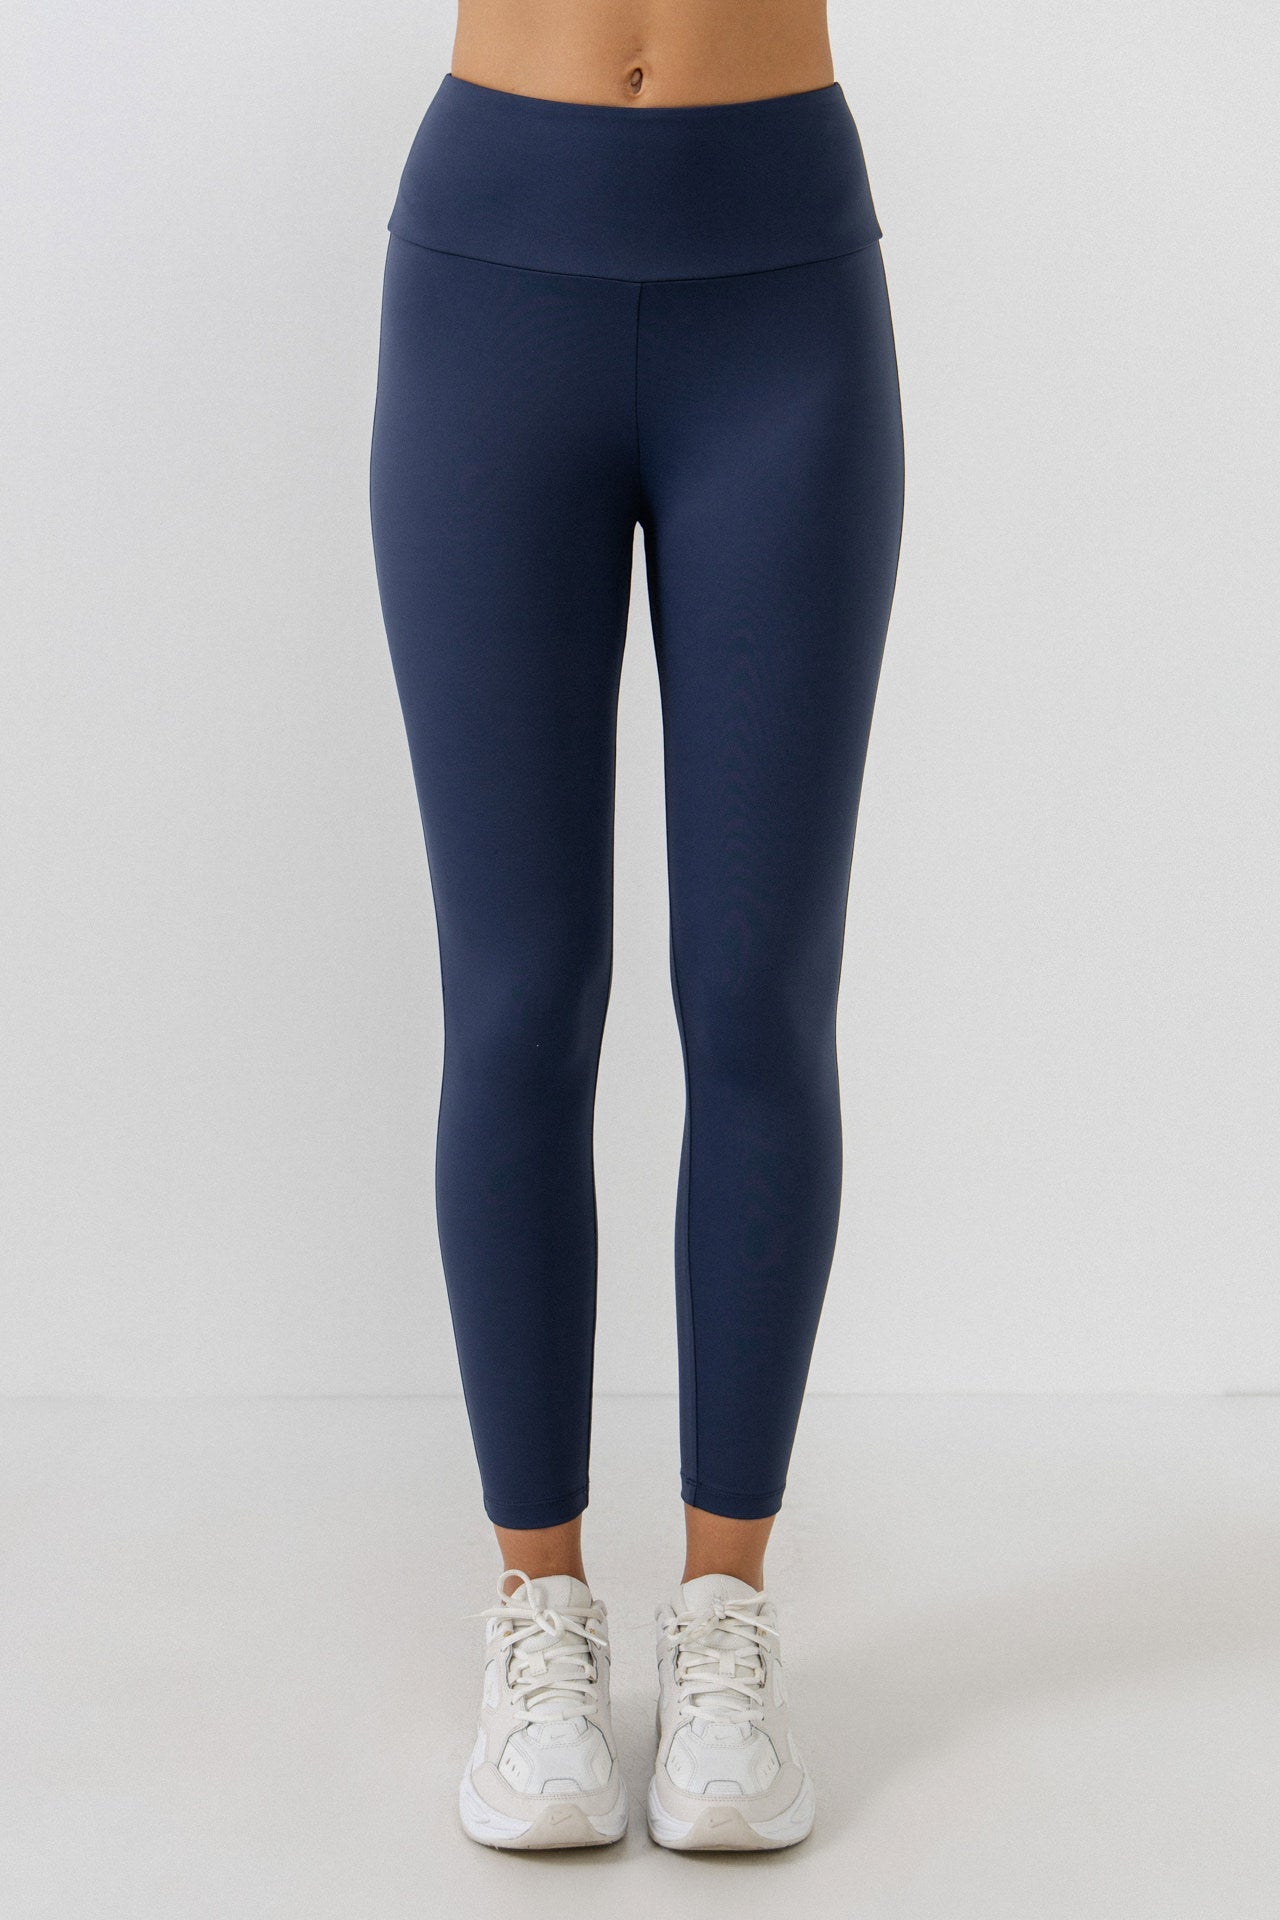 GREY LAB-Leggings-PANTS available at Objectrare